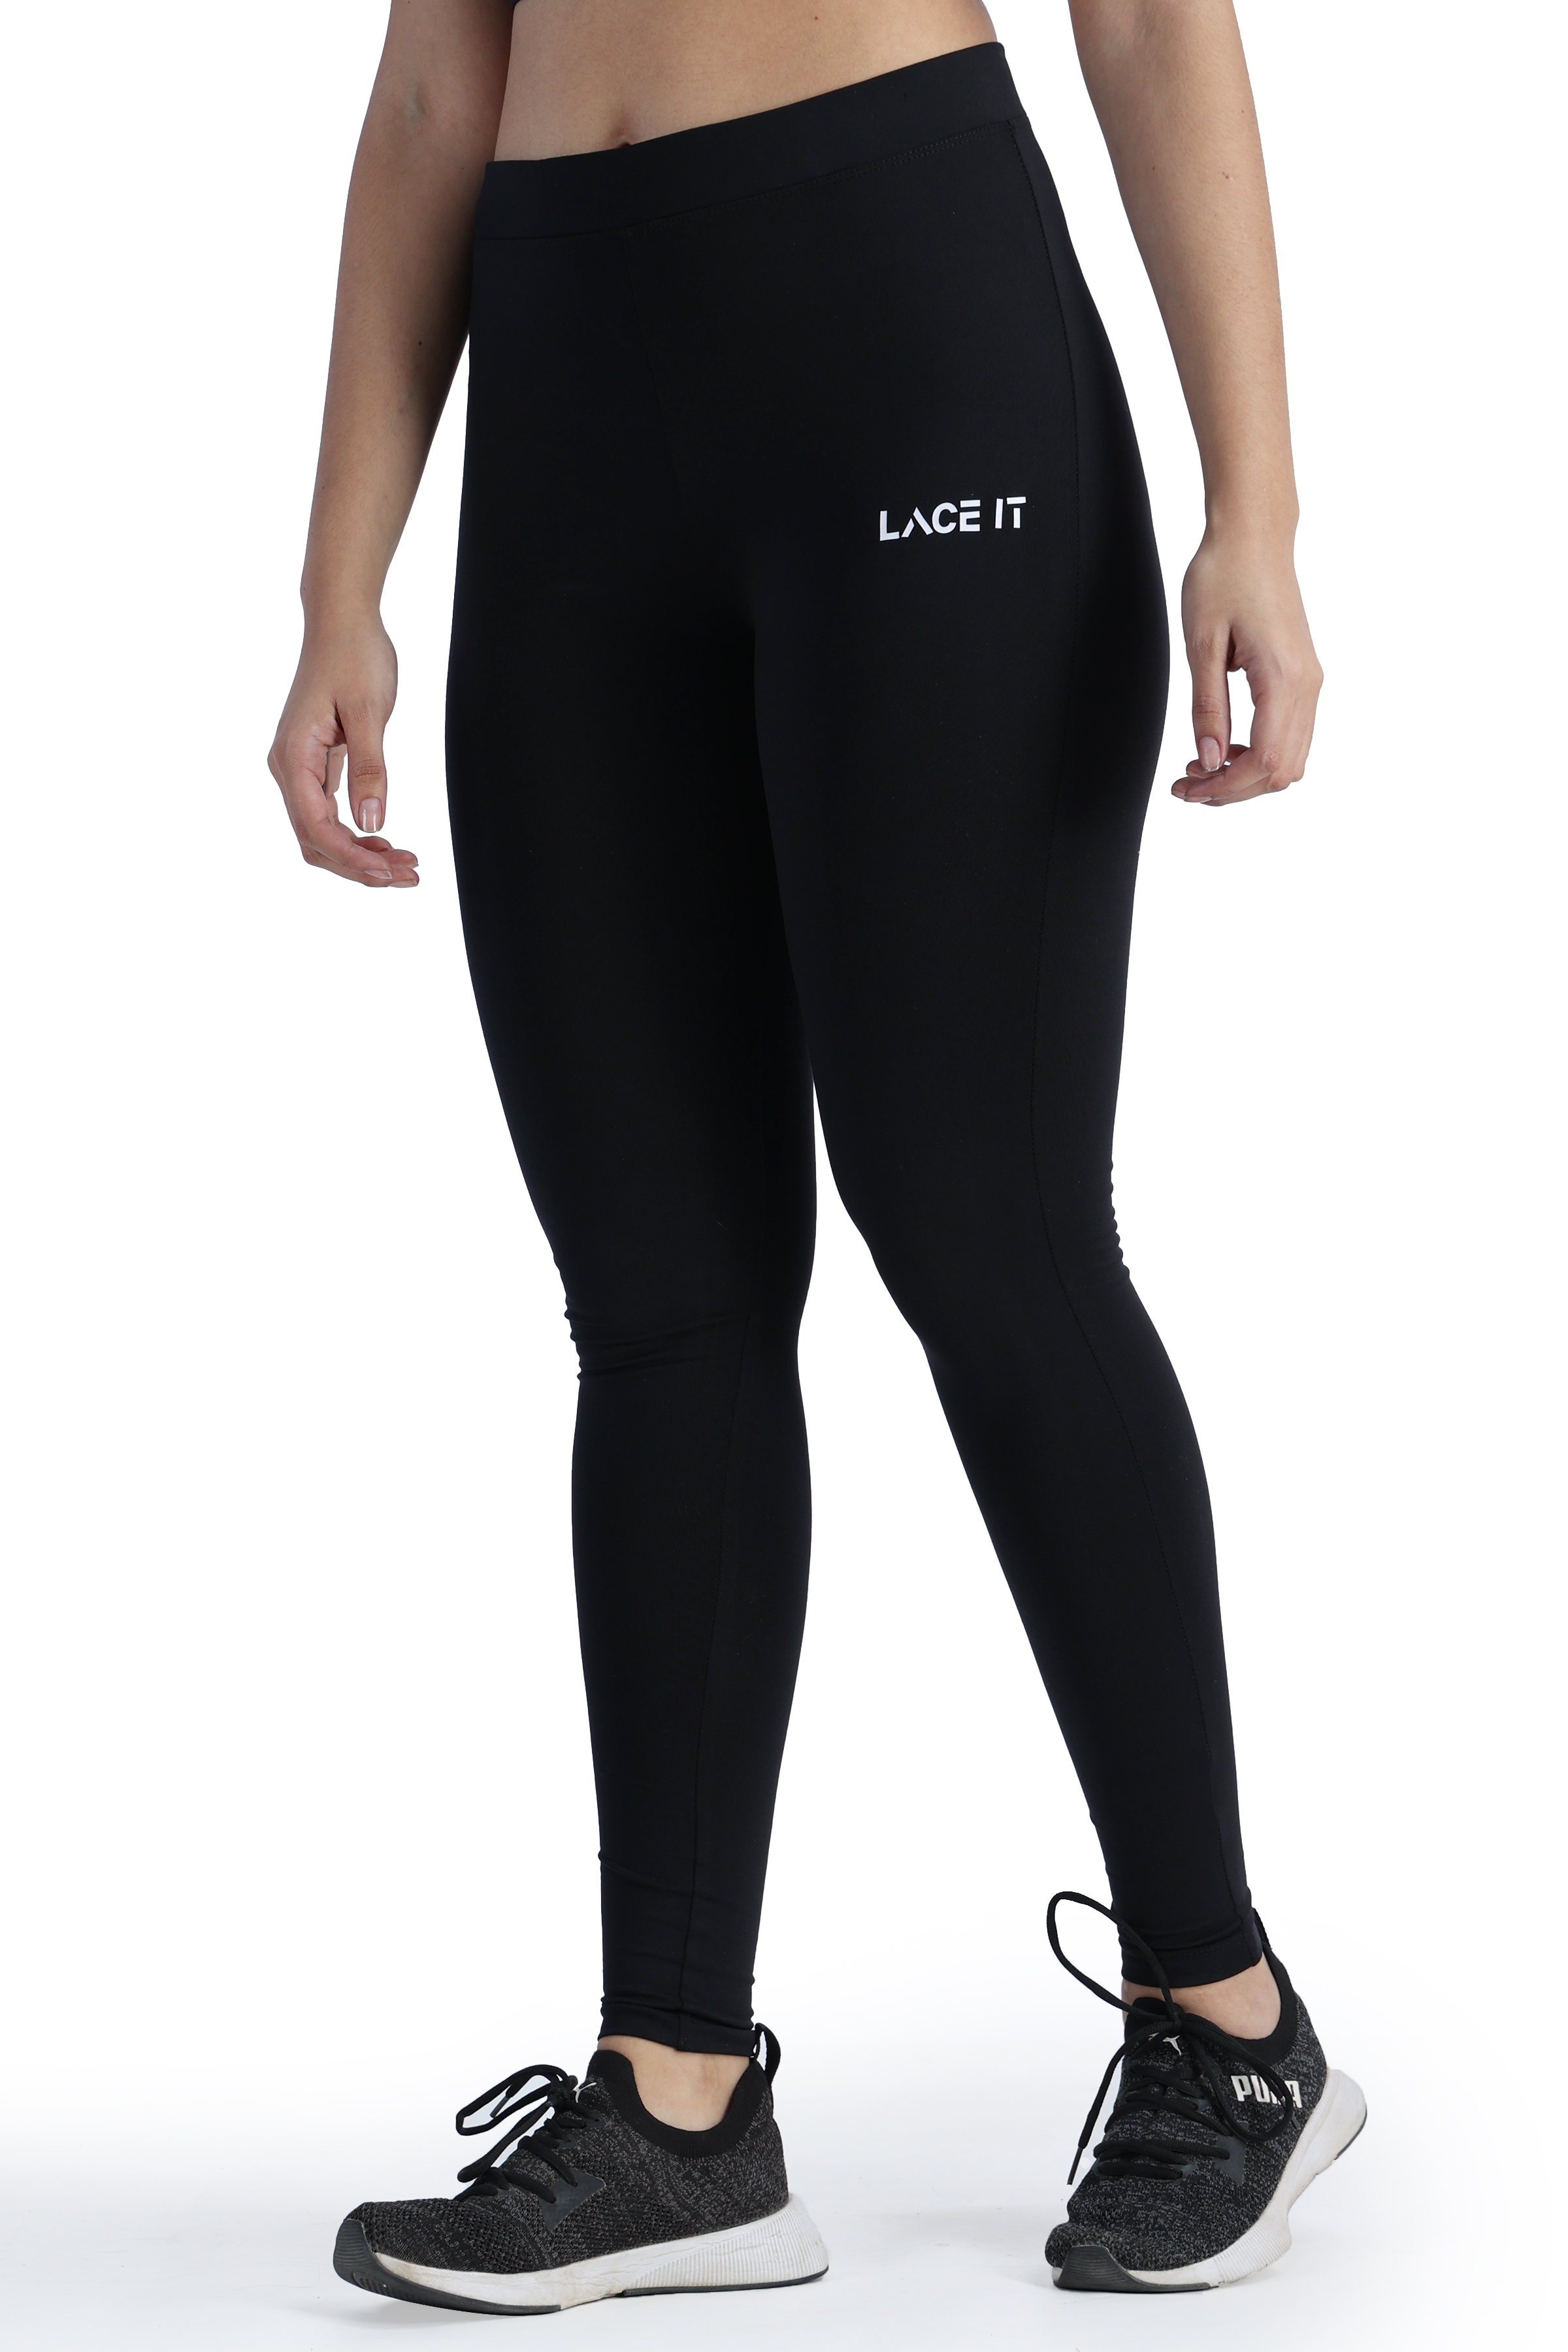 LACE IT | Women Yoga Pant and tight (Black)